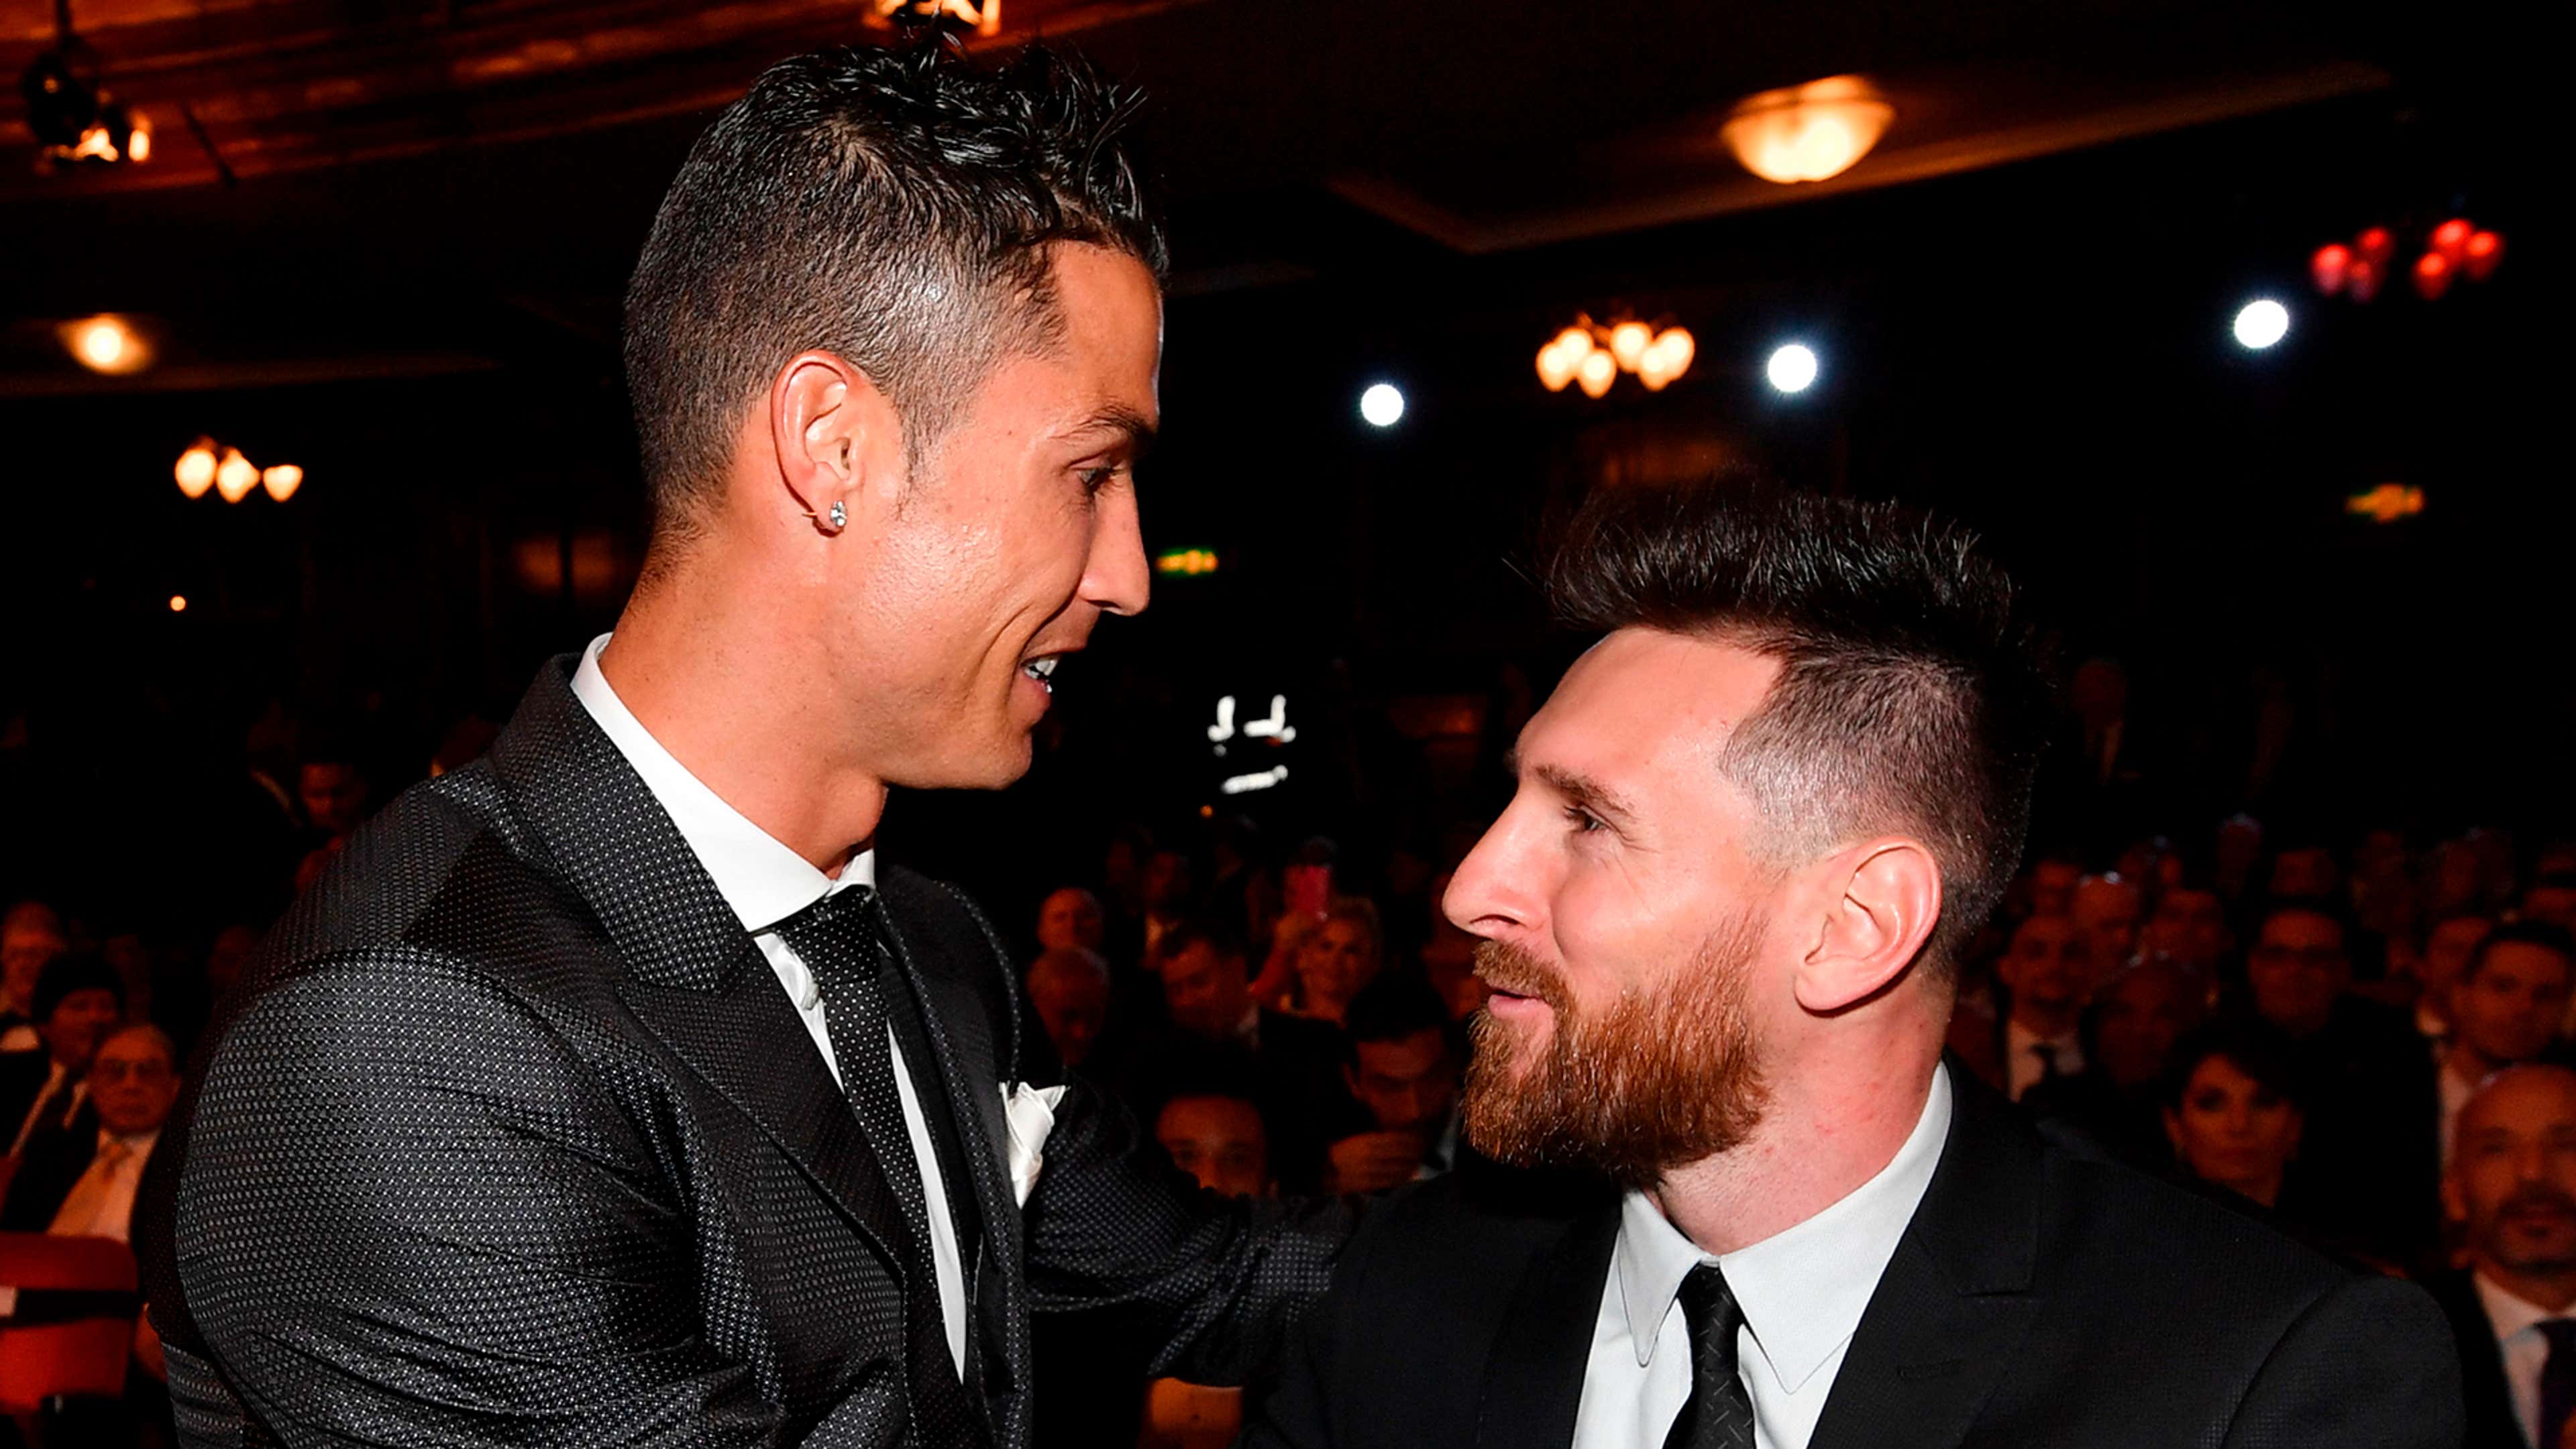 Cristiano Ronaldo says he and Lionel Messi are not 'friends